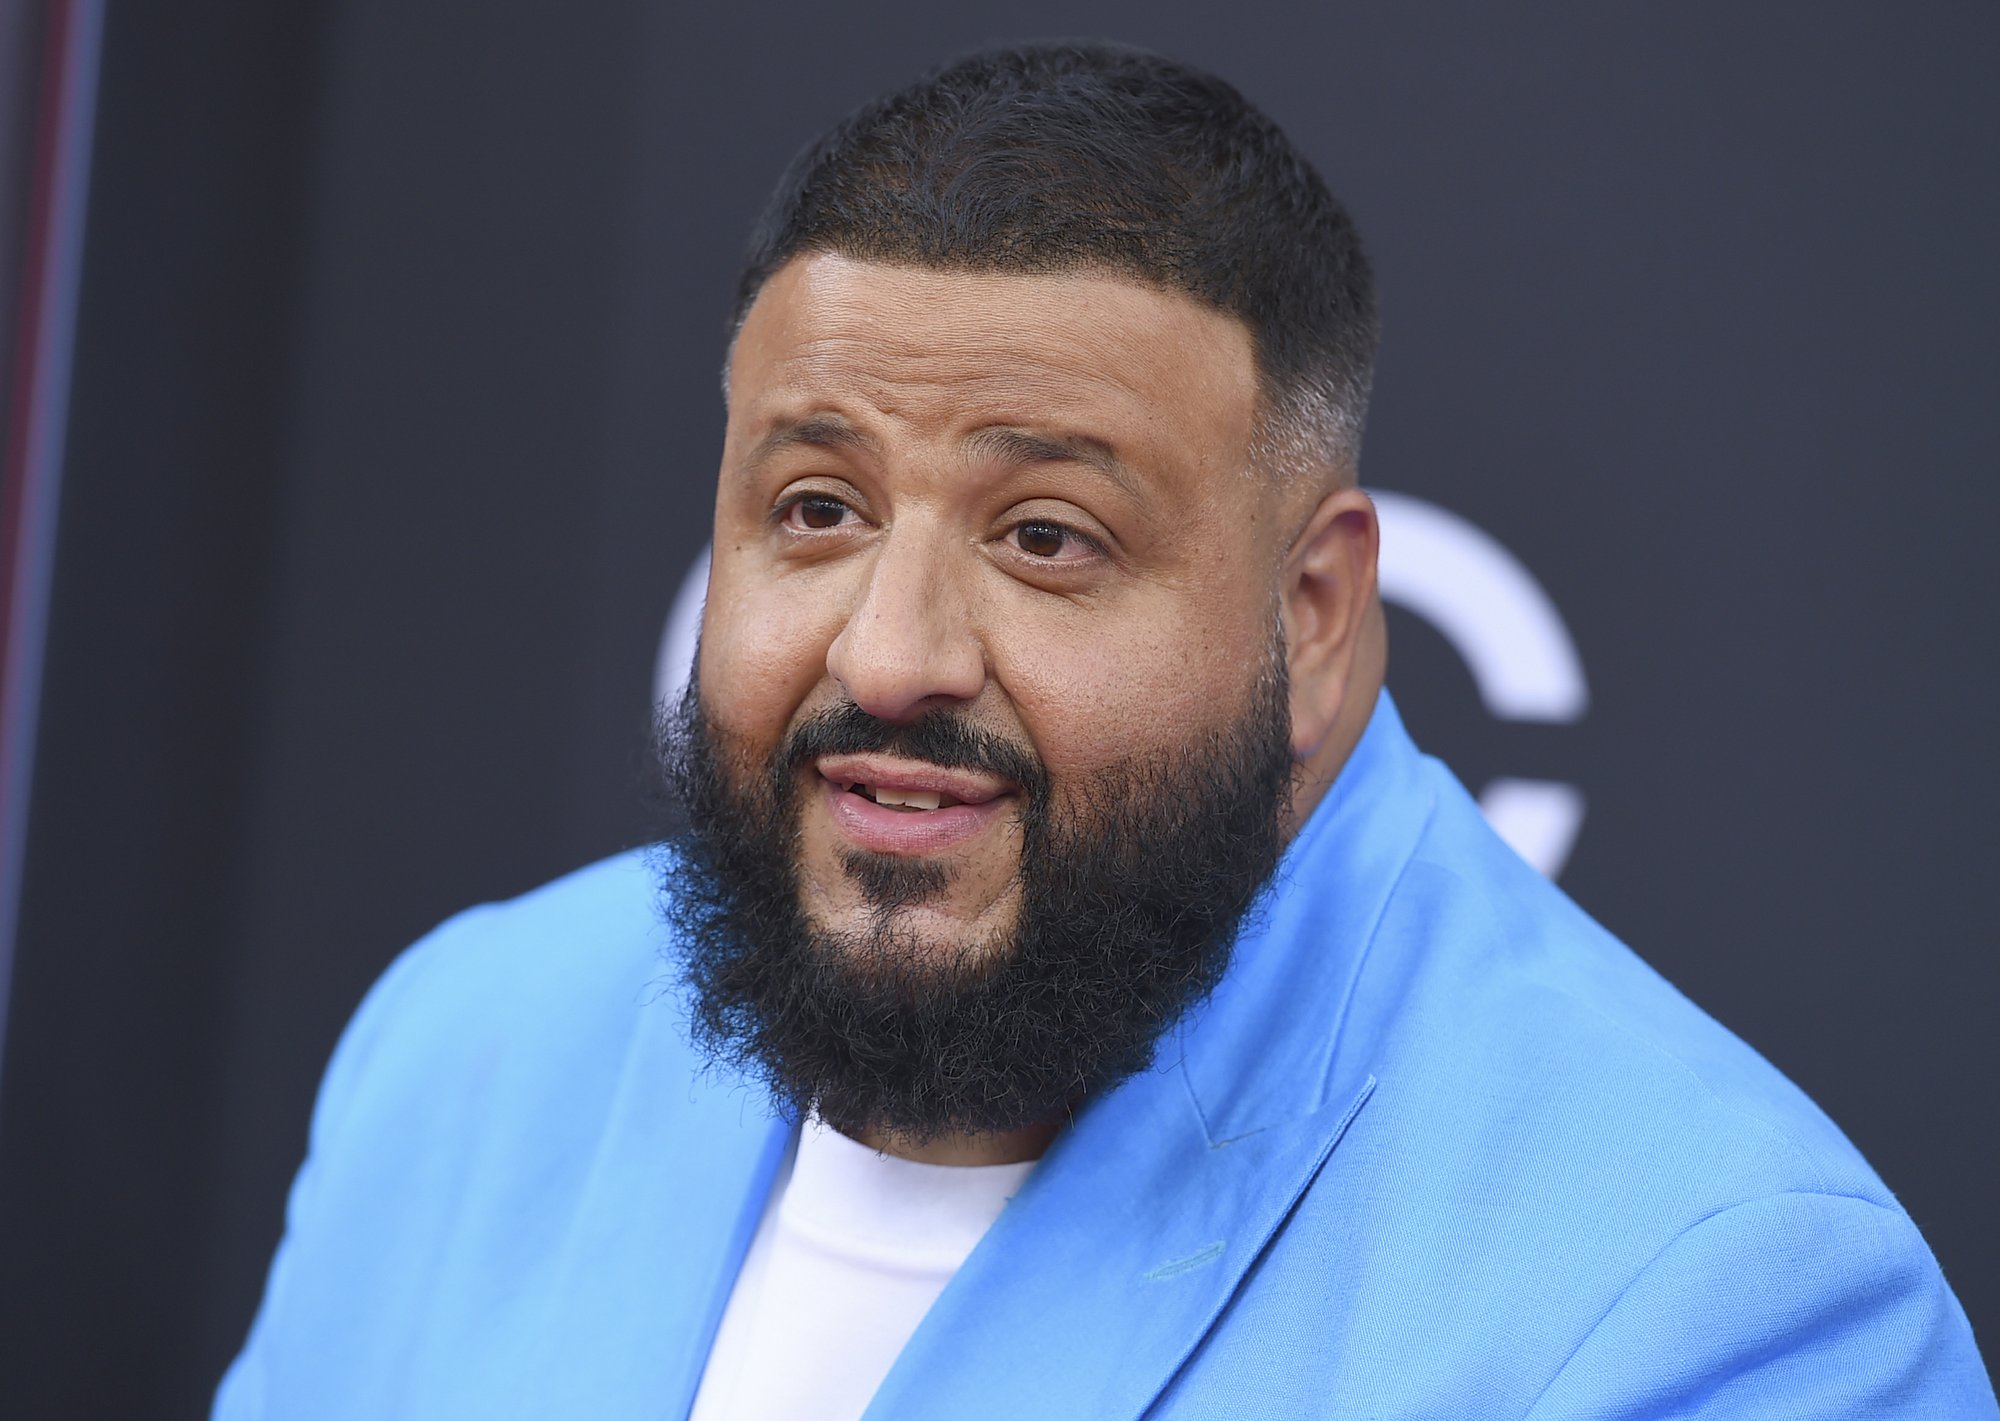 DJ Khaled inspired by son before hosting Kids’ Choice Awards